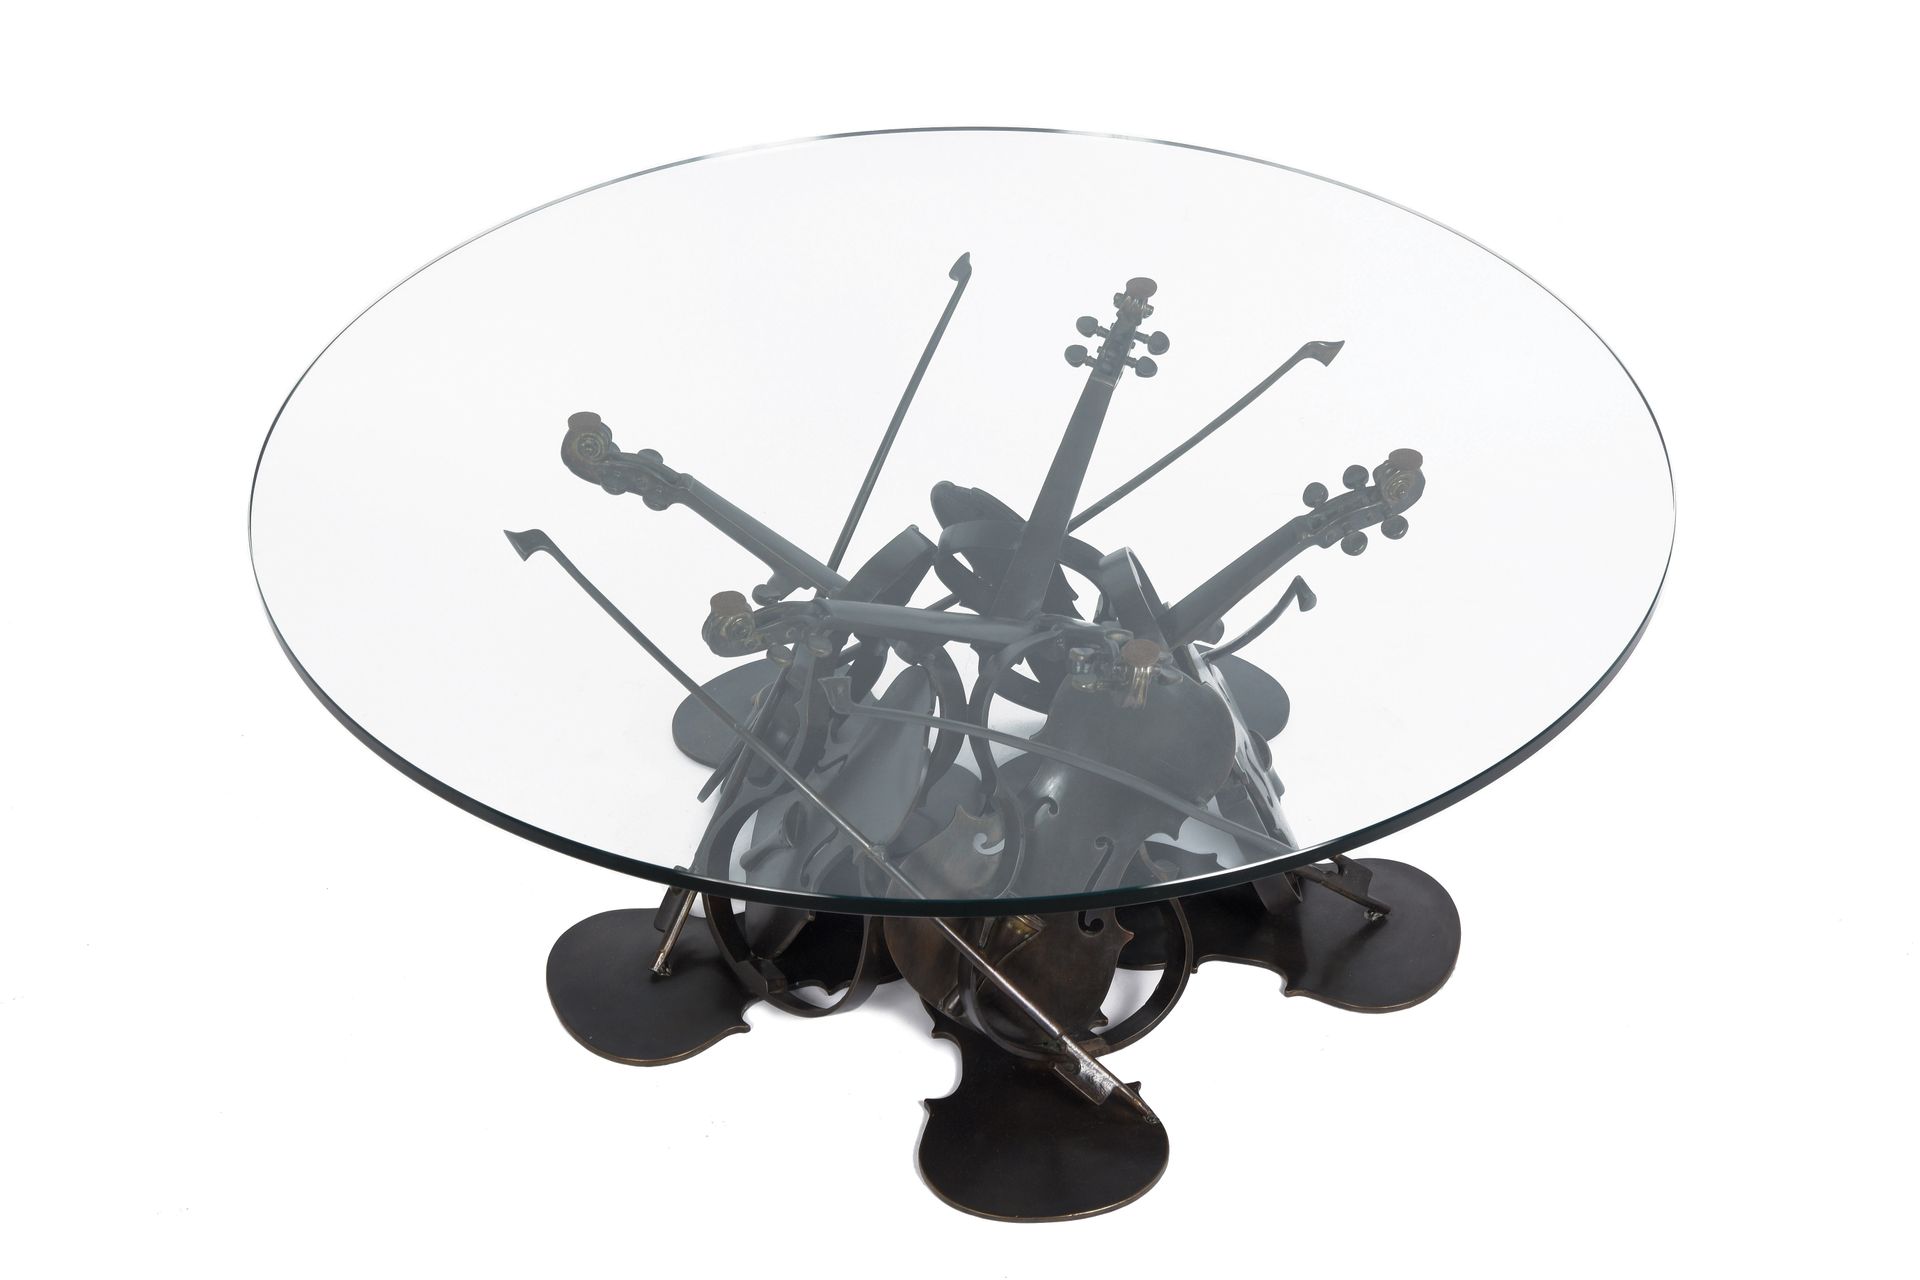 Null FERNANDEZ ARMAN (1928-2005)

Violin table, 1995

Patinated bronze base and &hellip;